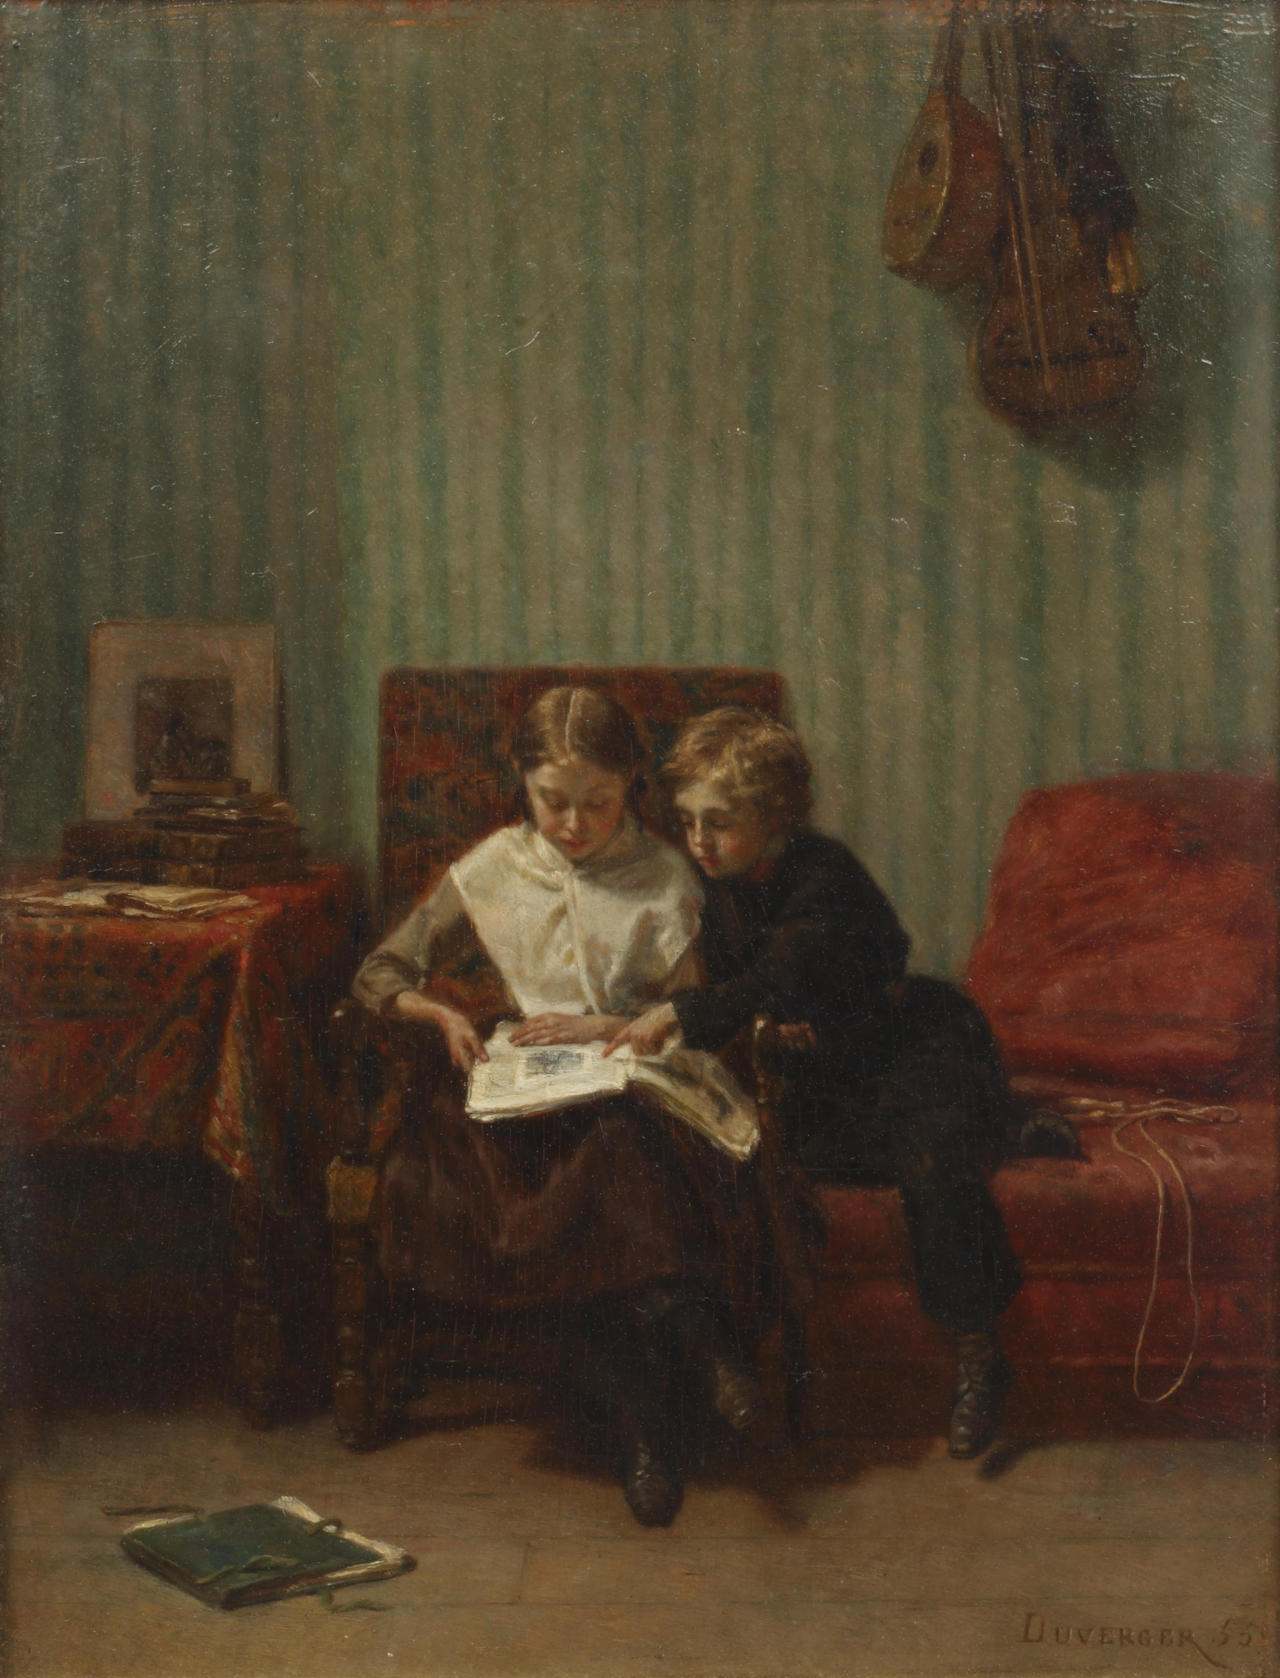 Two children reading in an interior (1855). Théophile-Emmanuel Duverger (French, 1821-c.1901). Oil on panel.
Duverger skipped the formal training taking by many of his contemporary artists who also found success at the Parisian Salon. Instead,...